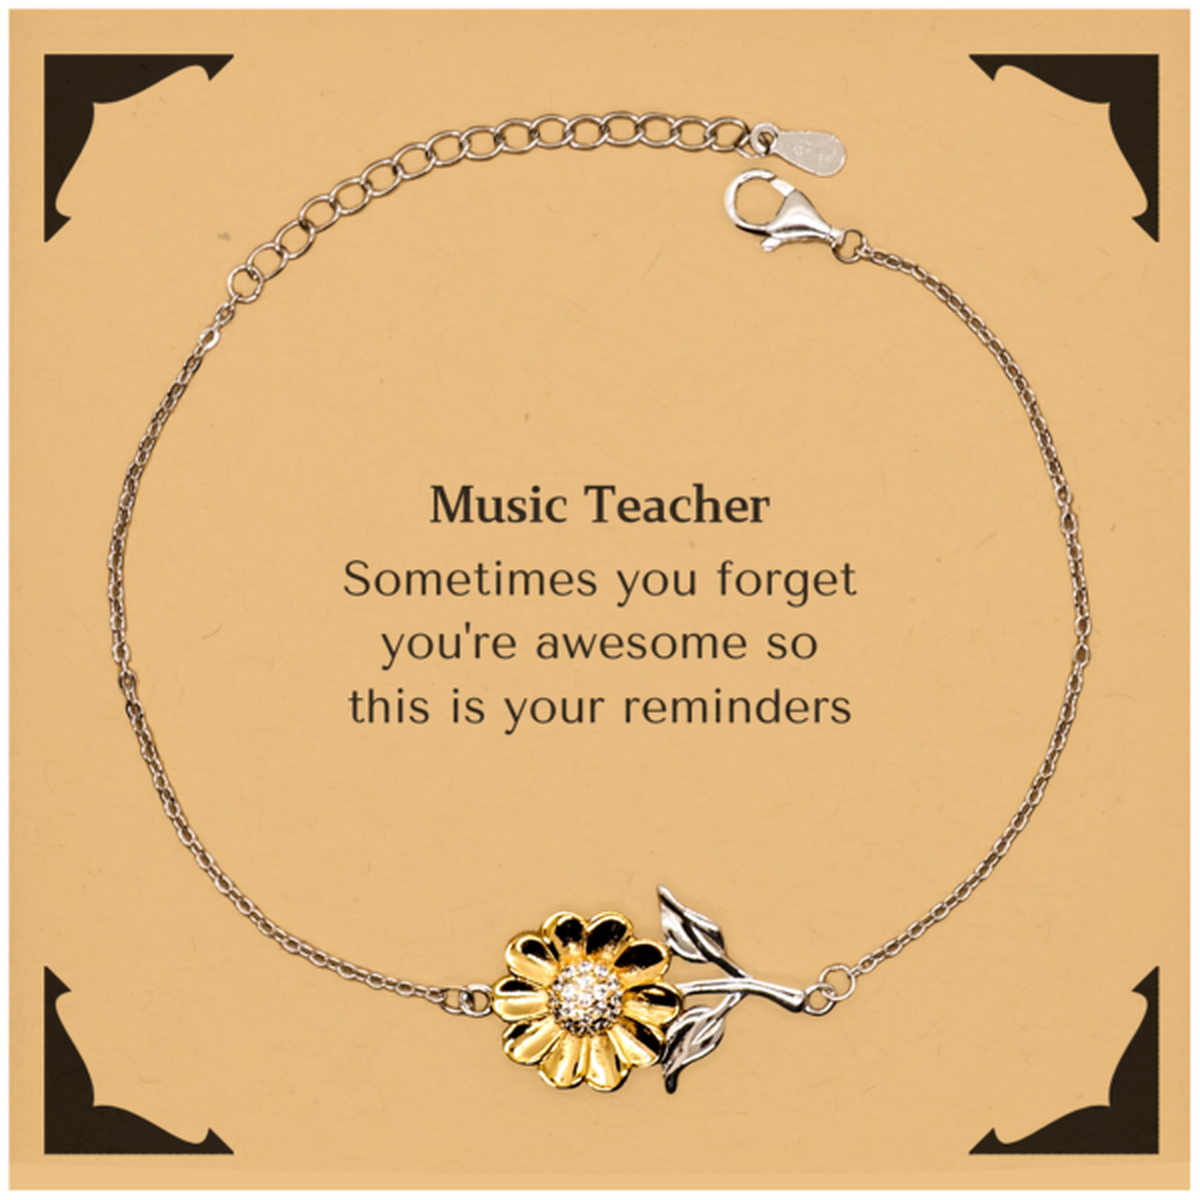 Sentimental Music Teacher Sunflower Bracelet, Music Teacher Sometimes you forget you're awesome so this is your reminders, Graduation Christmas Birthday Gifts for Music Teacher, Men, Women, Coworkers